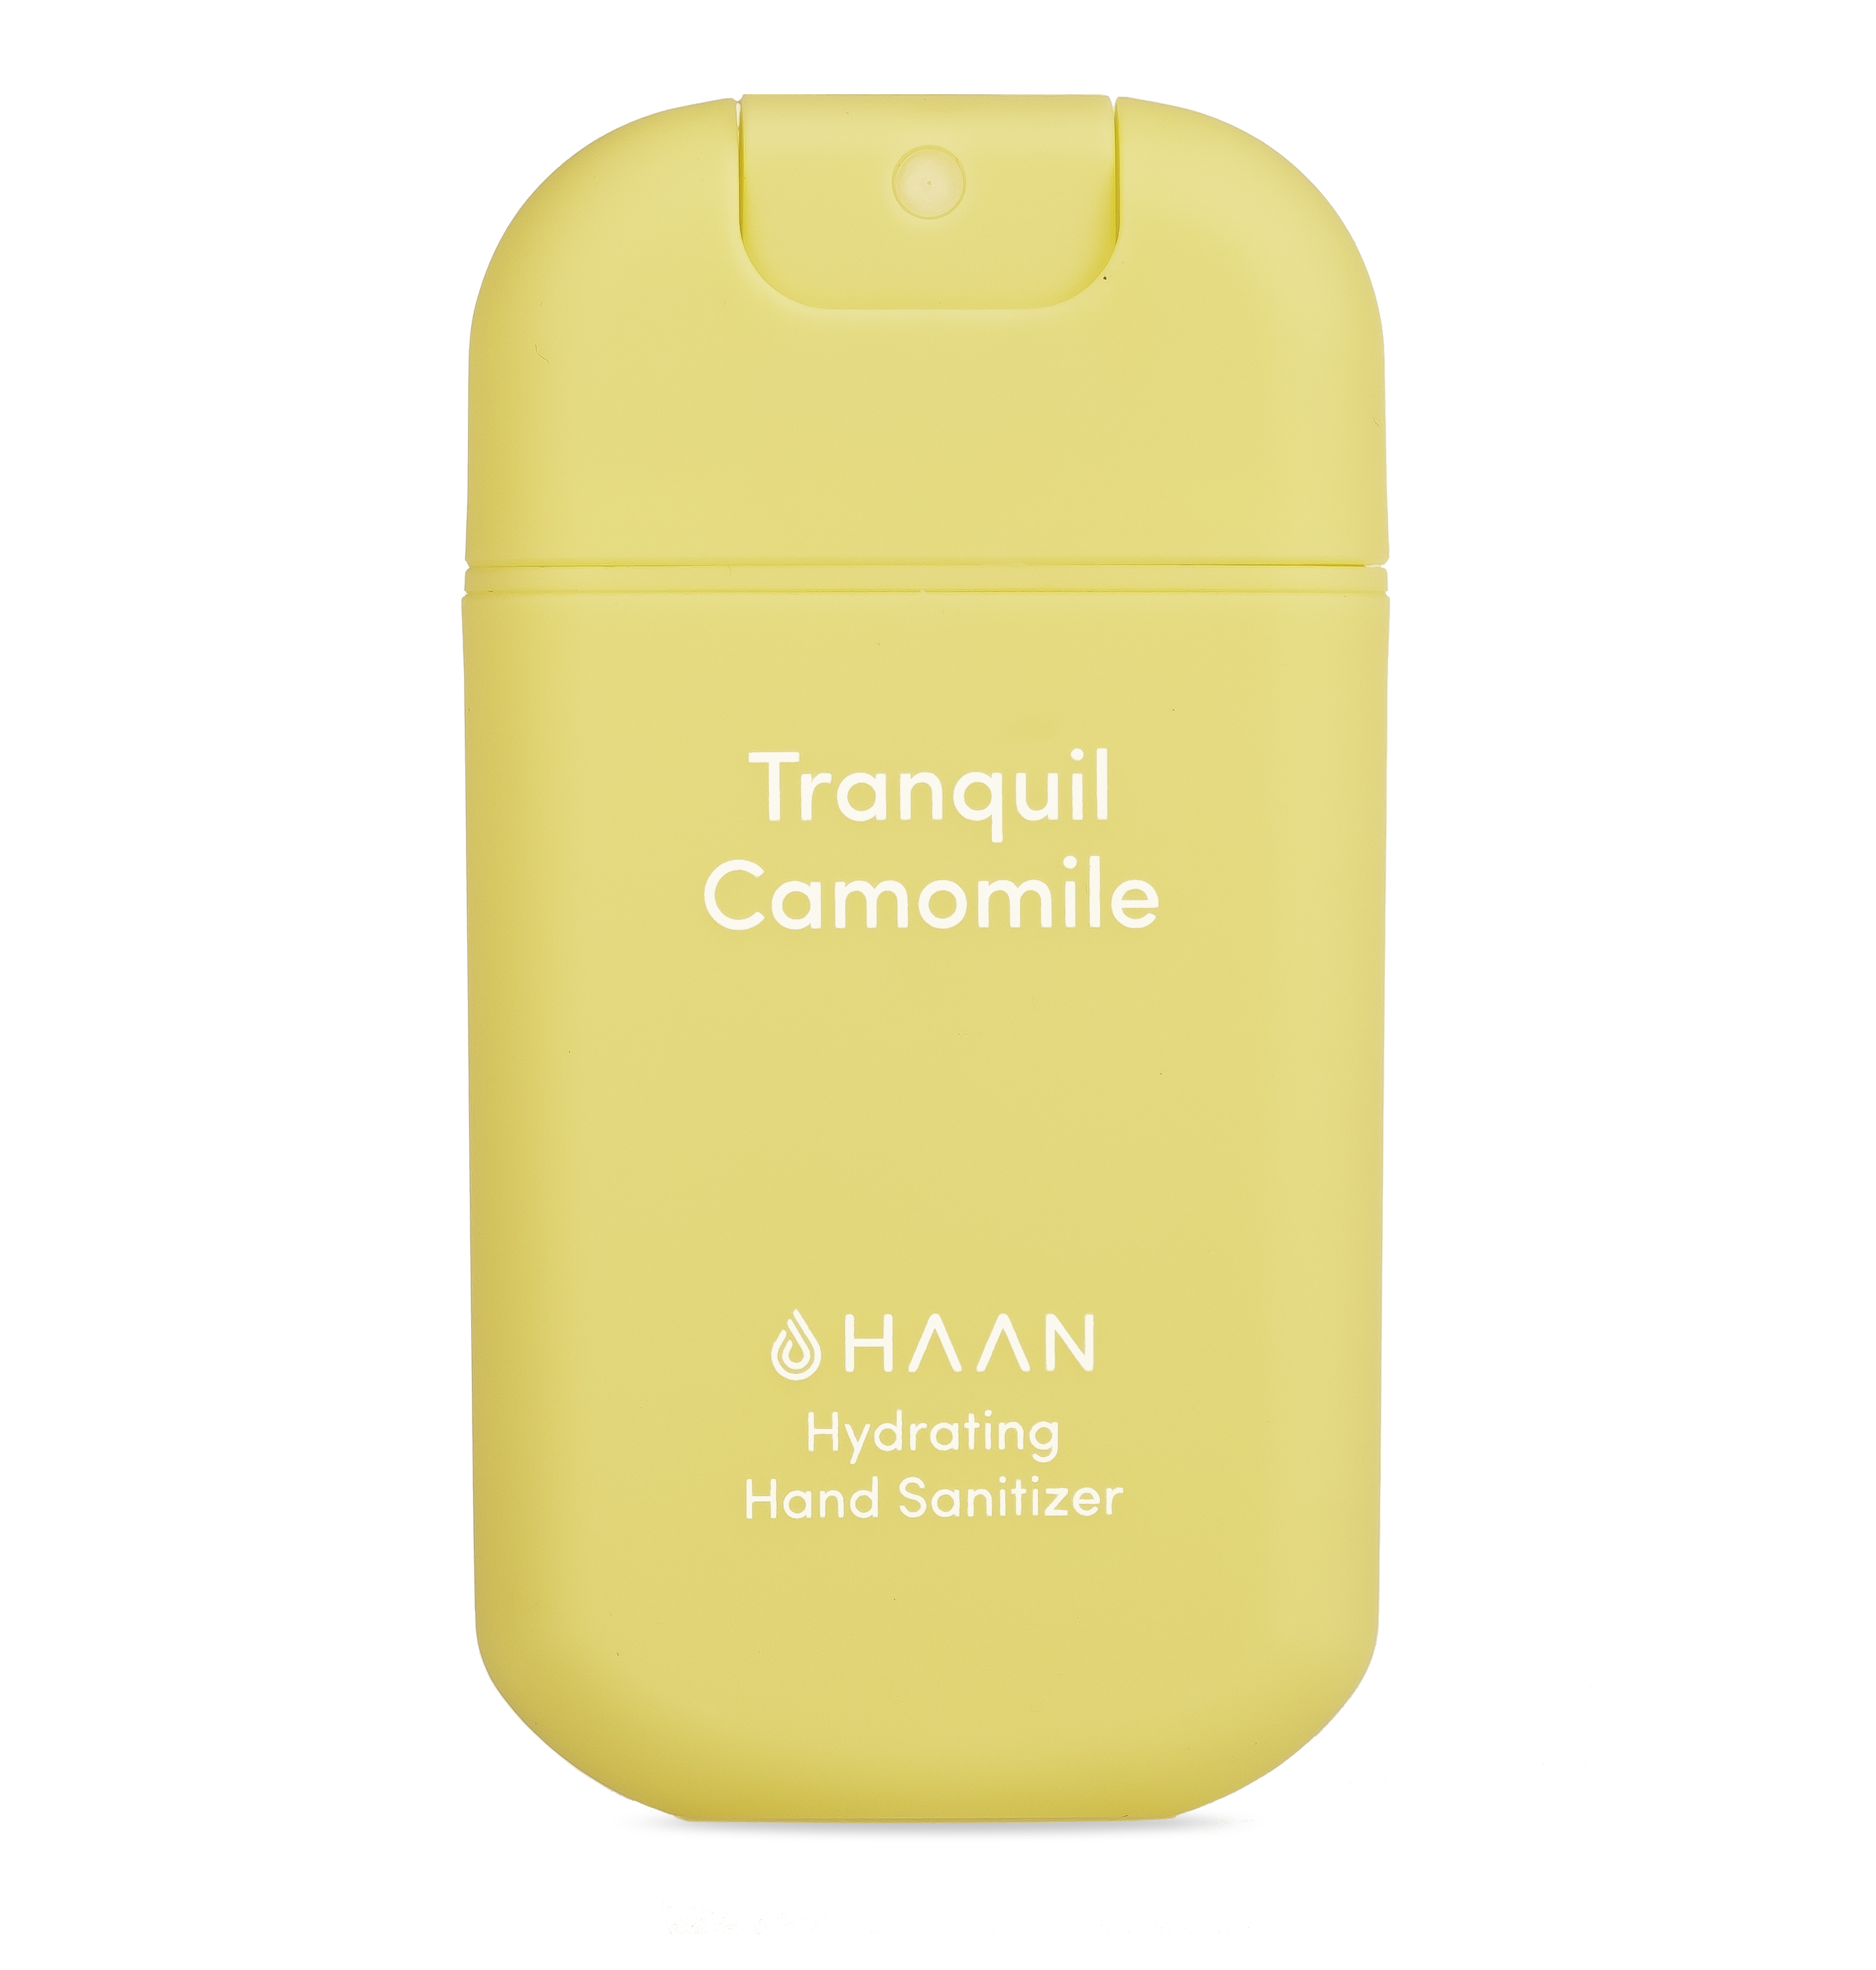 HAAN Tranquil Camomile Hydrating Pocket Hand Sanitizer 30 ml